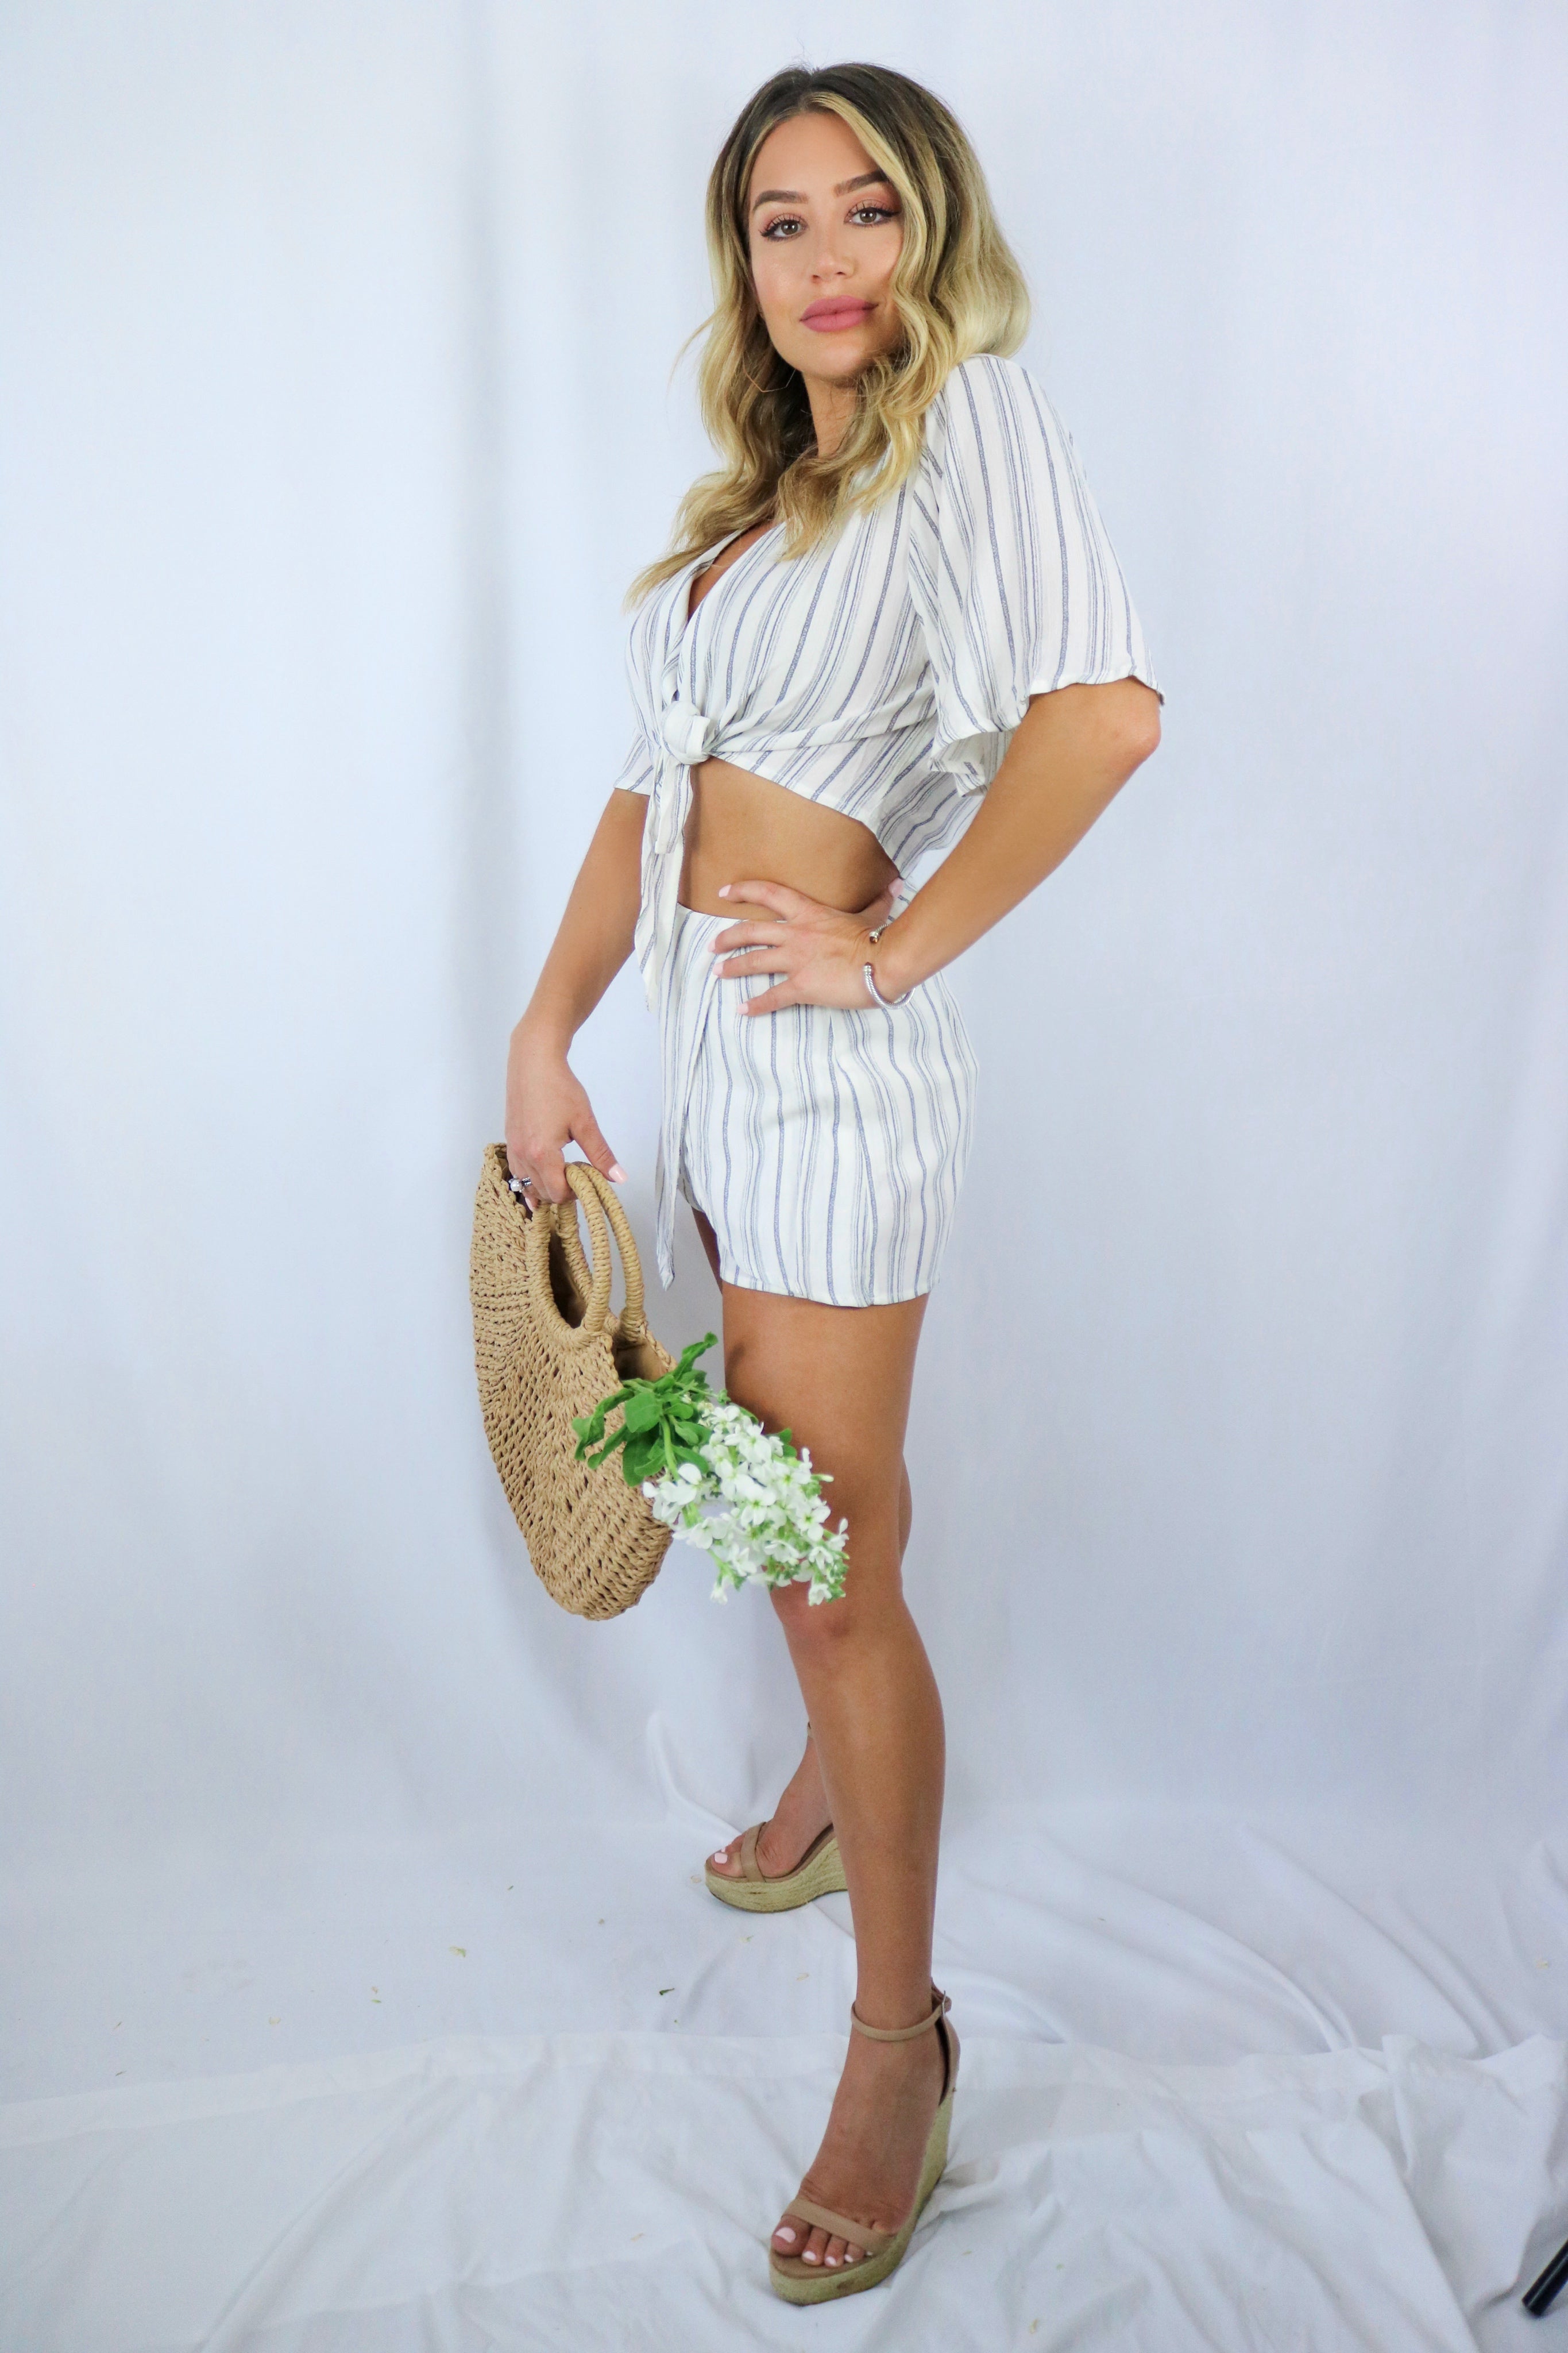 Blonde girl models a matching set for Scarlette The Label, an online fashion boutique for women. The set is a matching short set in white and charcoal stripes. Includes a short sleeve tie top and a skort. Paired with large straw bag.